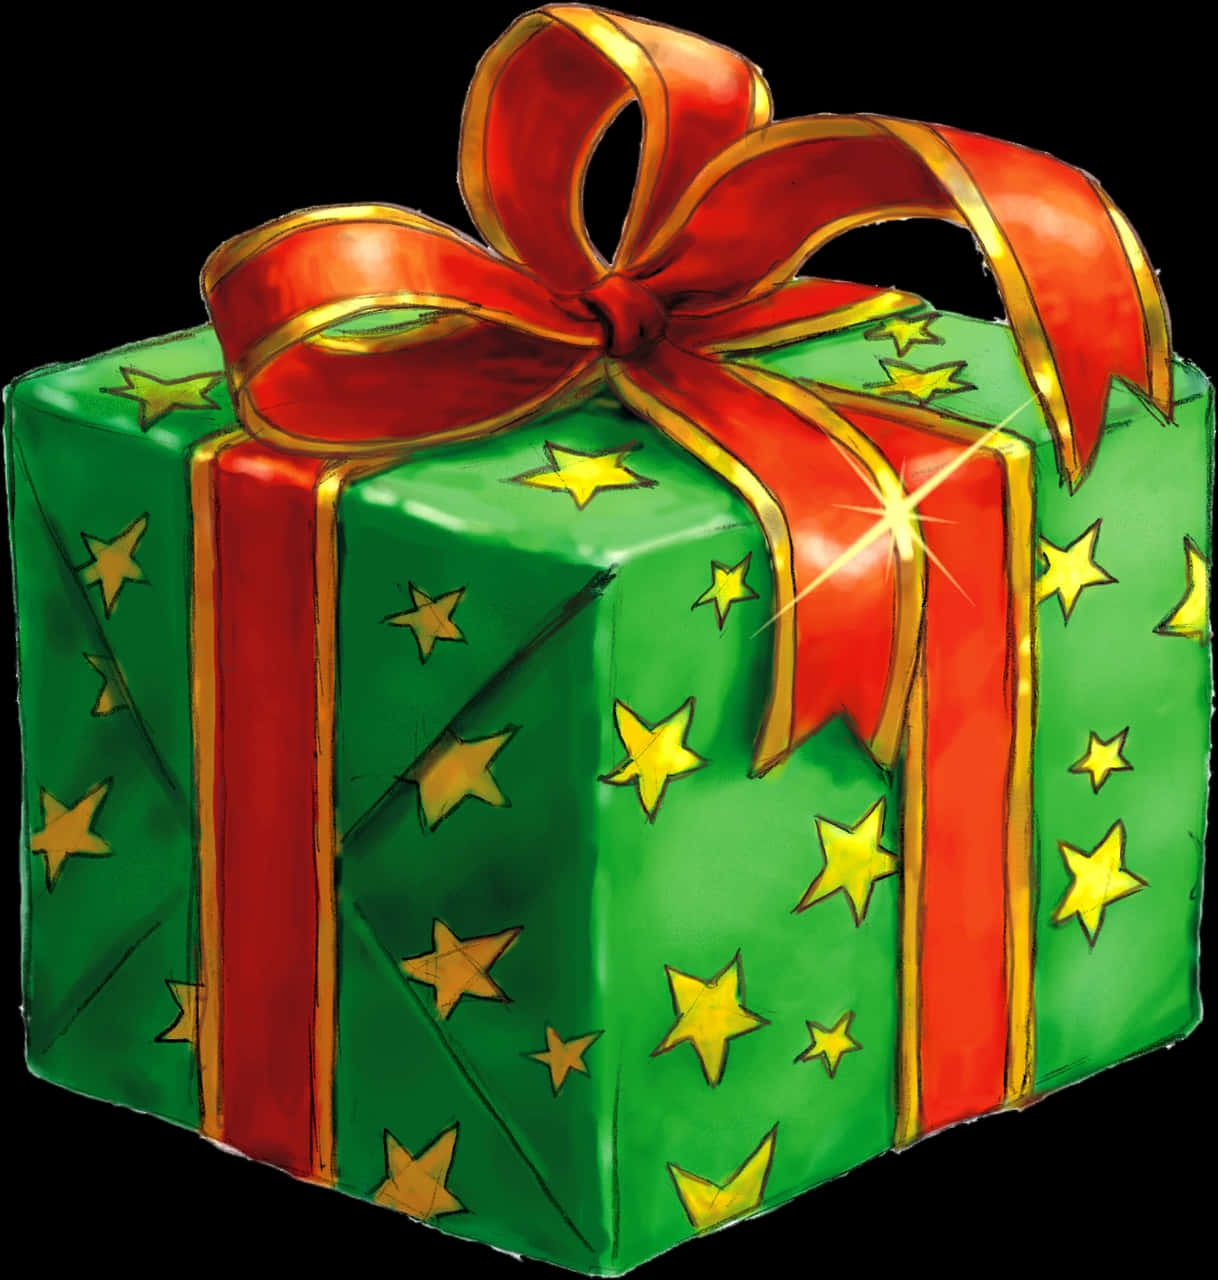 Green Gift Box With Red Ribbon